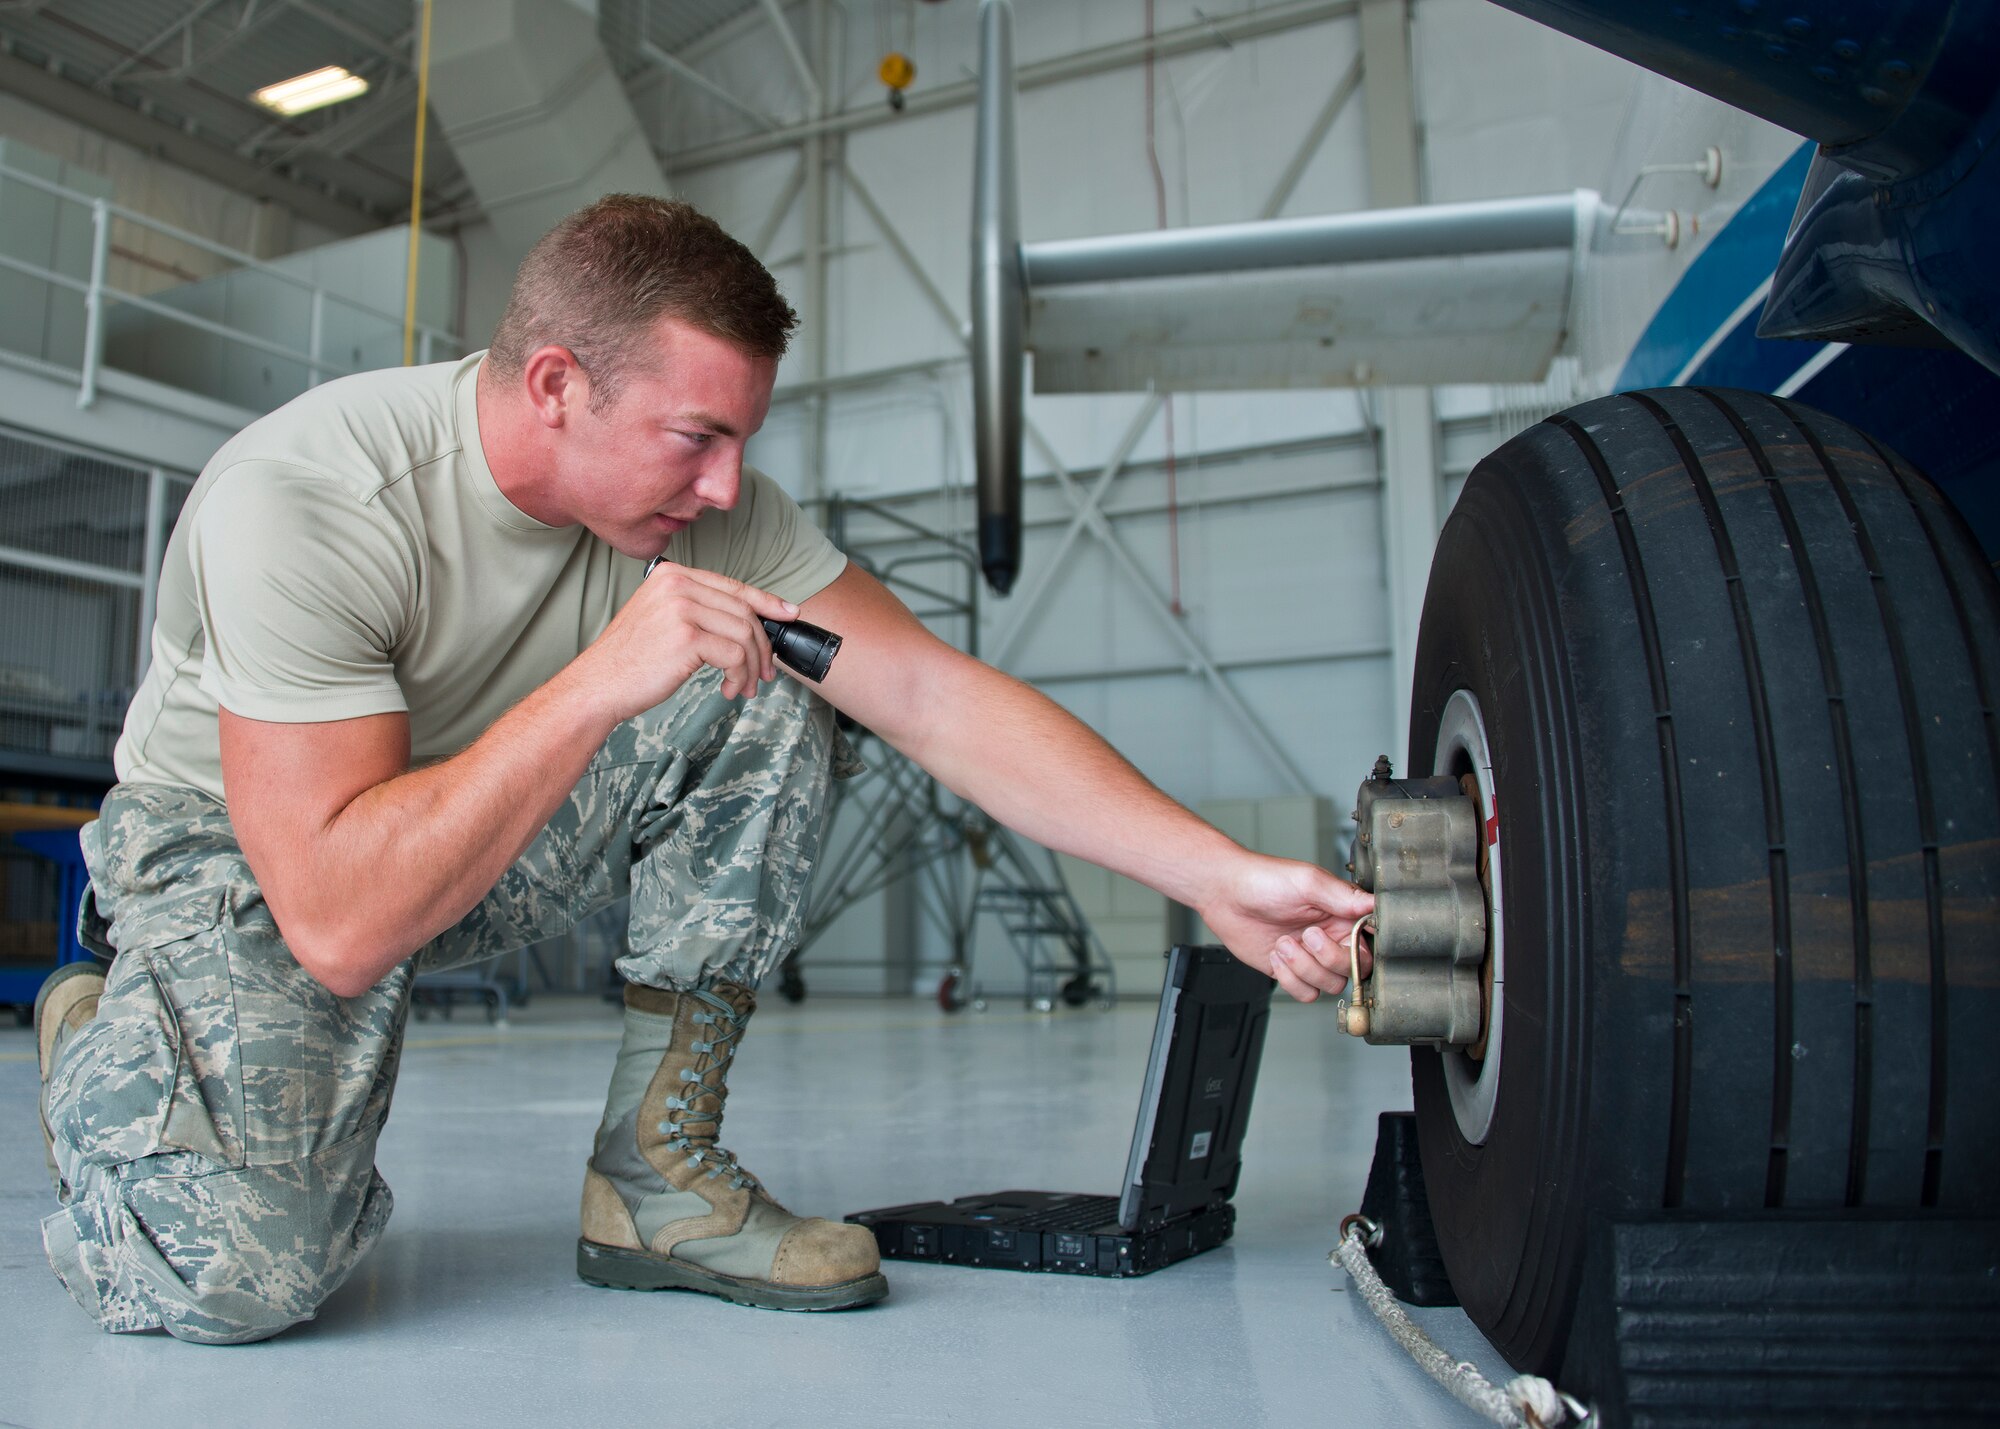 Senior Airman Kristopher Golden, 919th Special Operations Maintenance Group, checks the brakes of a C-145 June 6 at Duke Field, Fla. The 919th SOMXG is comprised of 919th SOMXS, 919th SOAMXS, 919th SOMOF, and the 592nd SOMXS.  Their primary mission is the maintenance of the C-145 aircraft. (U.S. Air Force photo/Tech. Sgt. Sam King)